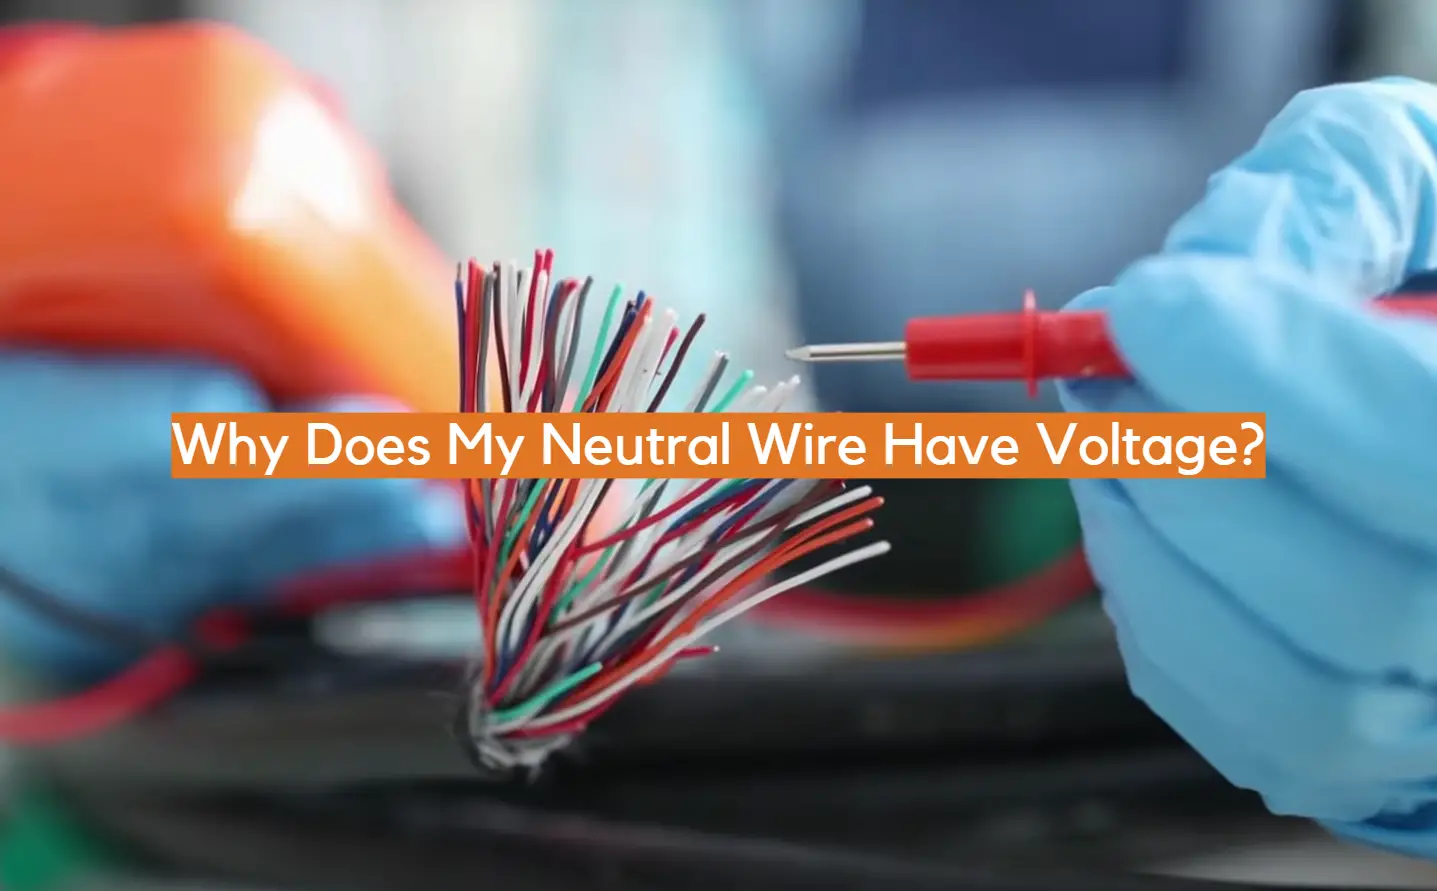 Why Does My Neutral Wire Have Voltage?